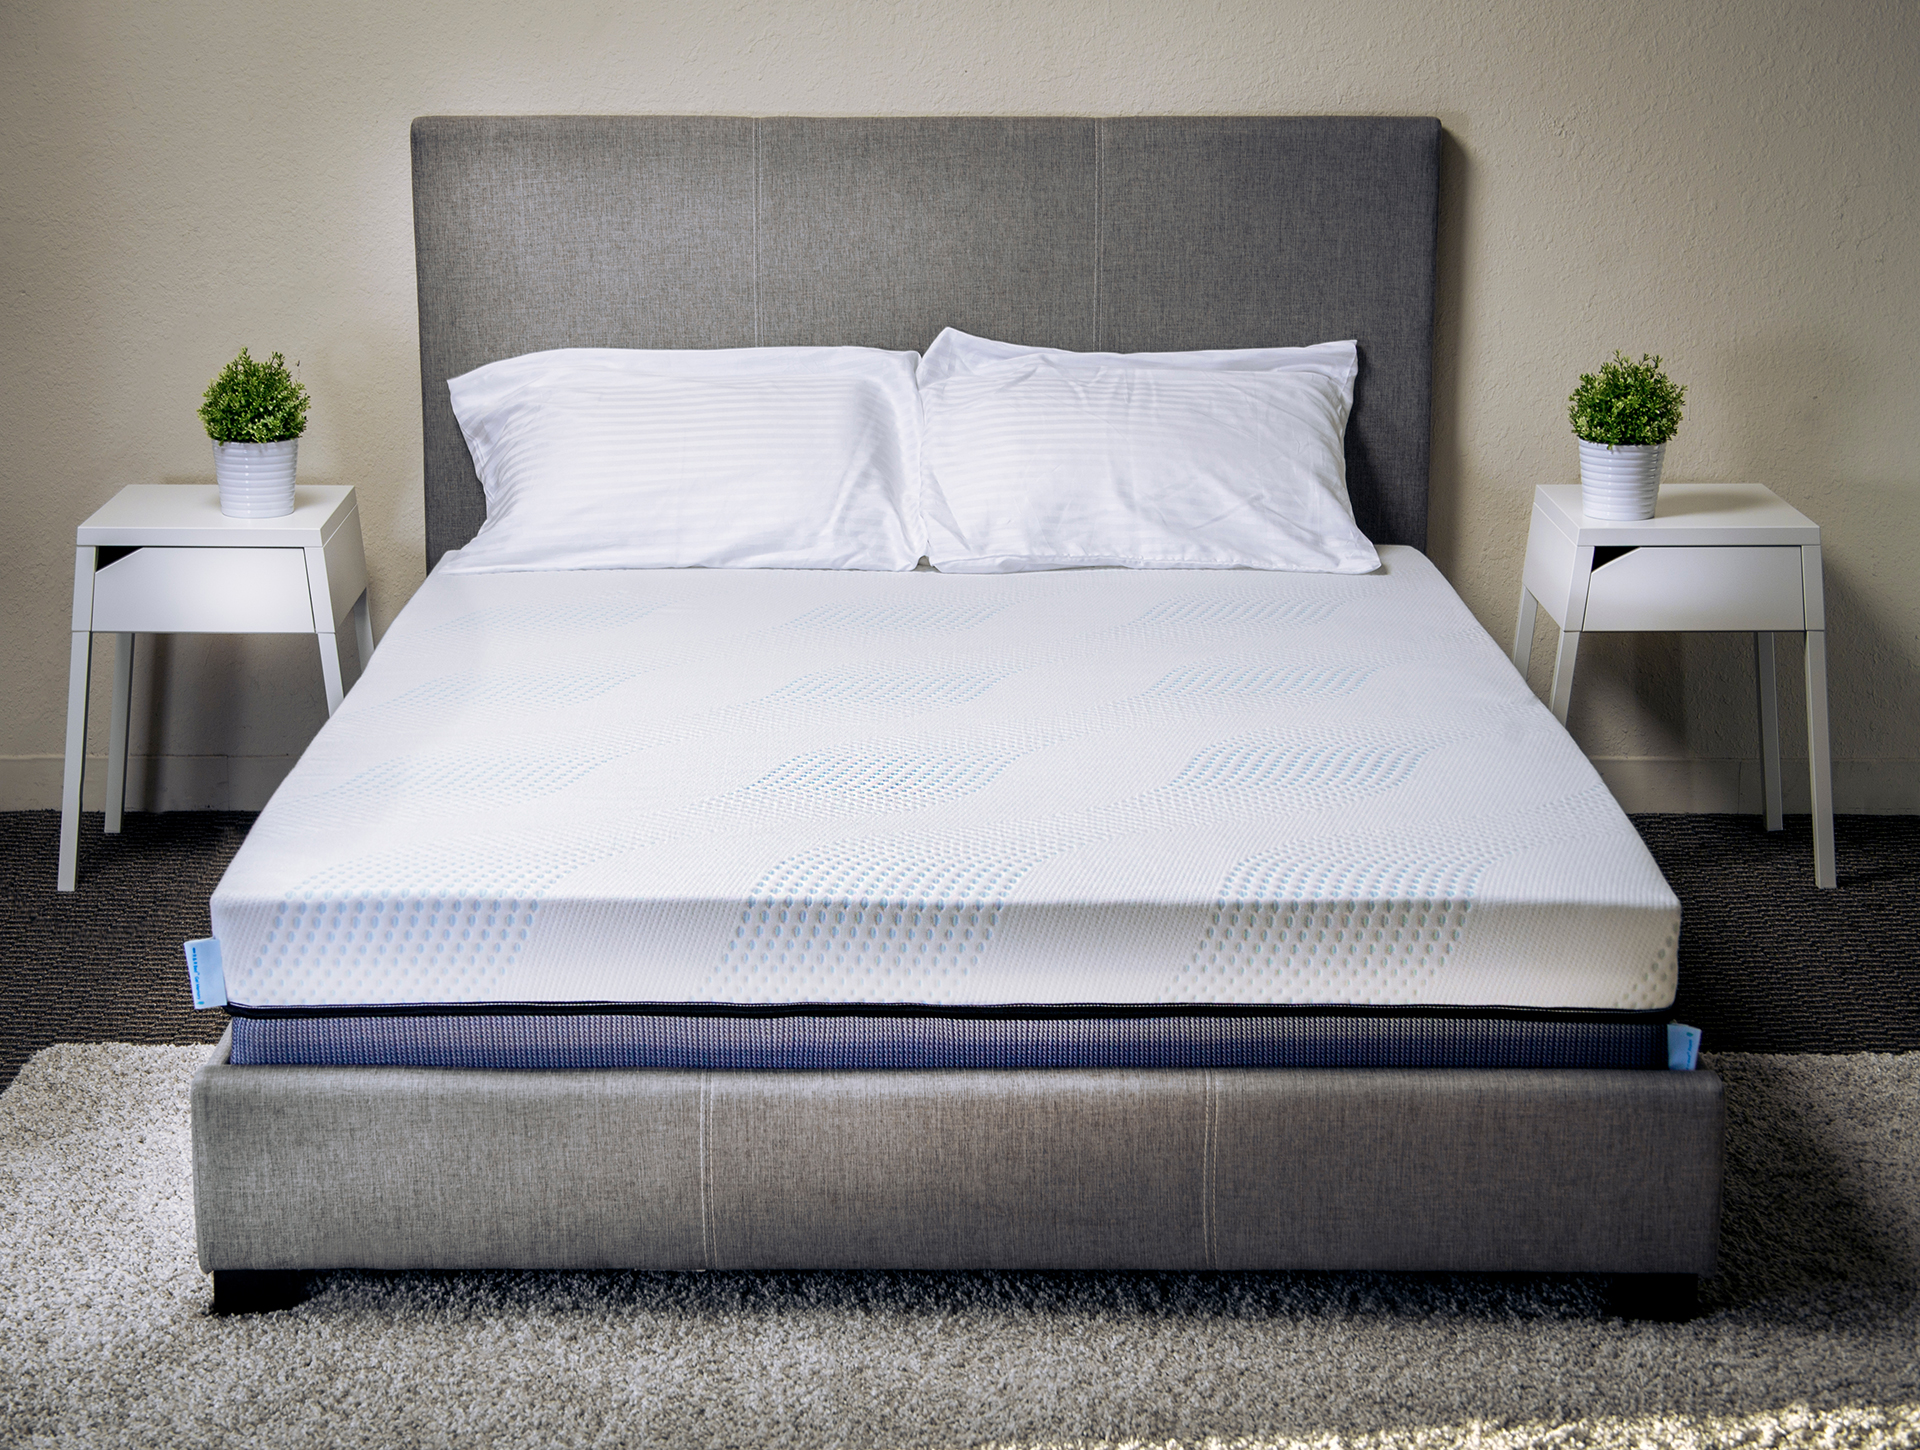 New Versatile 8-in-1 Flippable Mattress Set to Disrupt Bed-in-a-Box ...